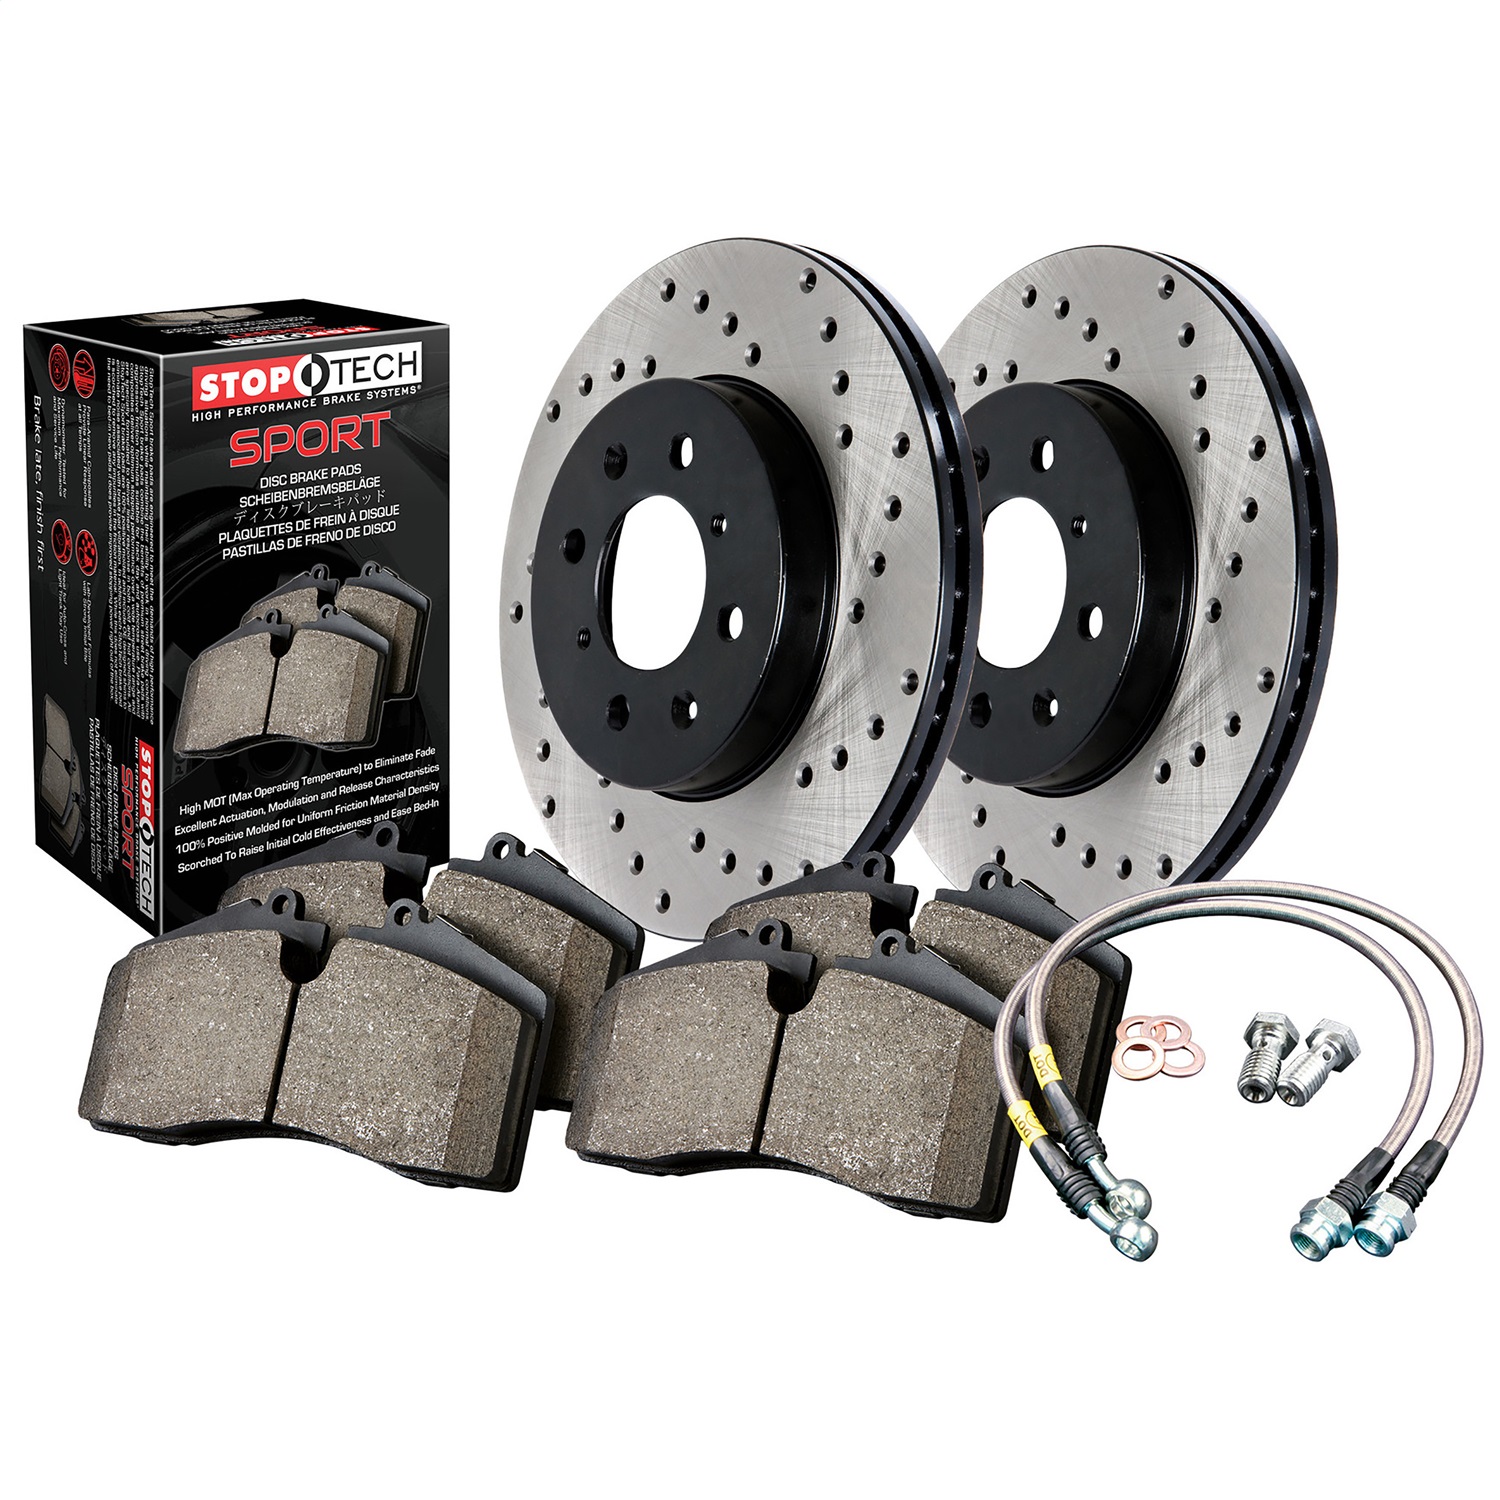 StopTech 979.33080F Sport Disc Brake Kit w/Cross-Drilled Rotor Fits 11-19 S4 S5